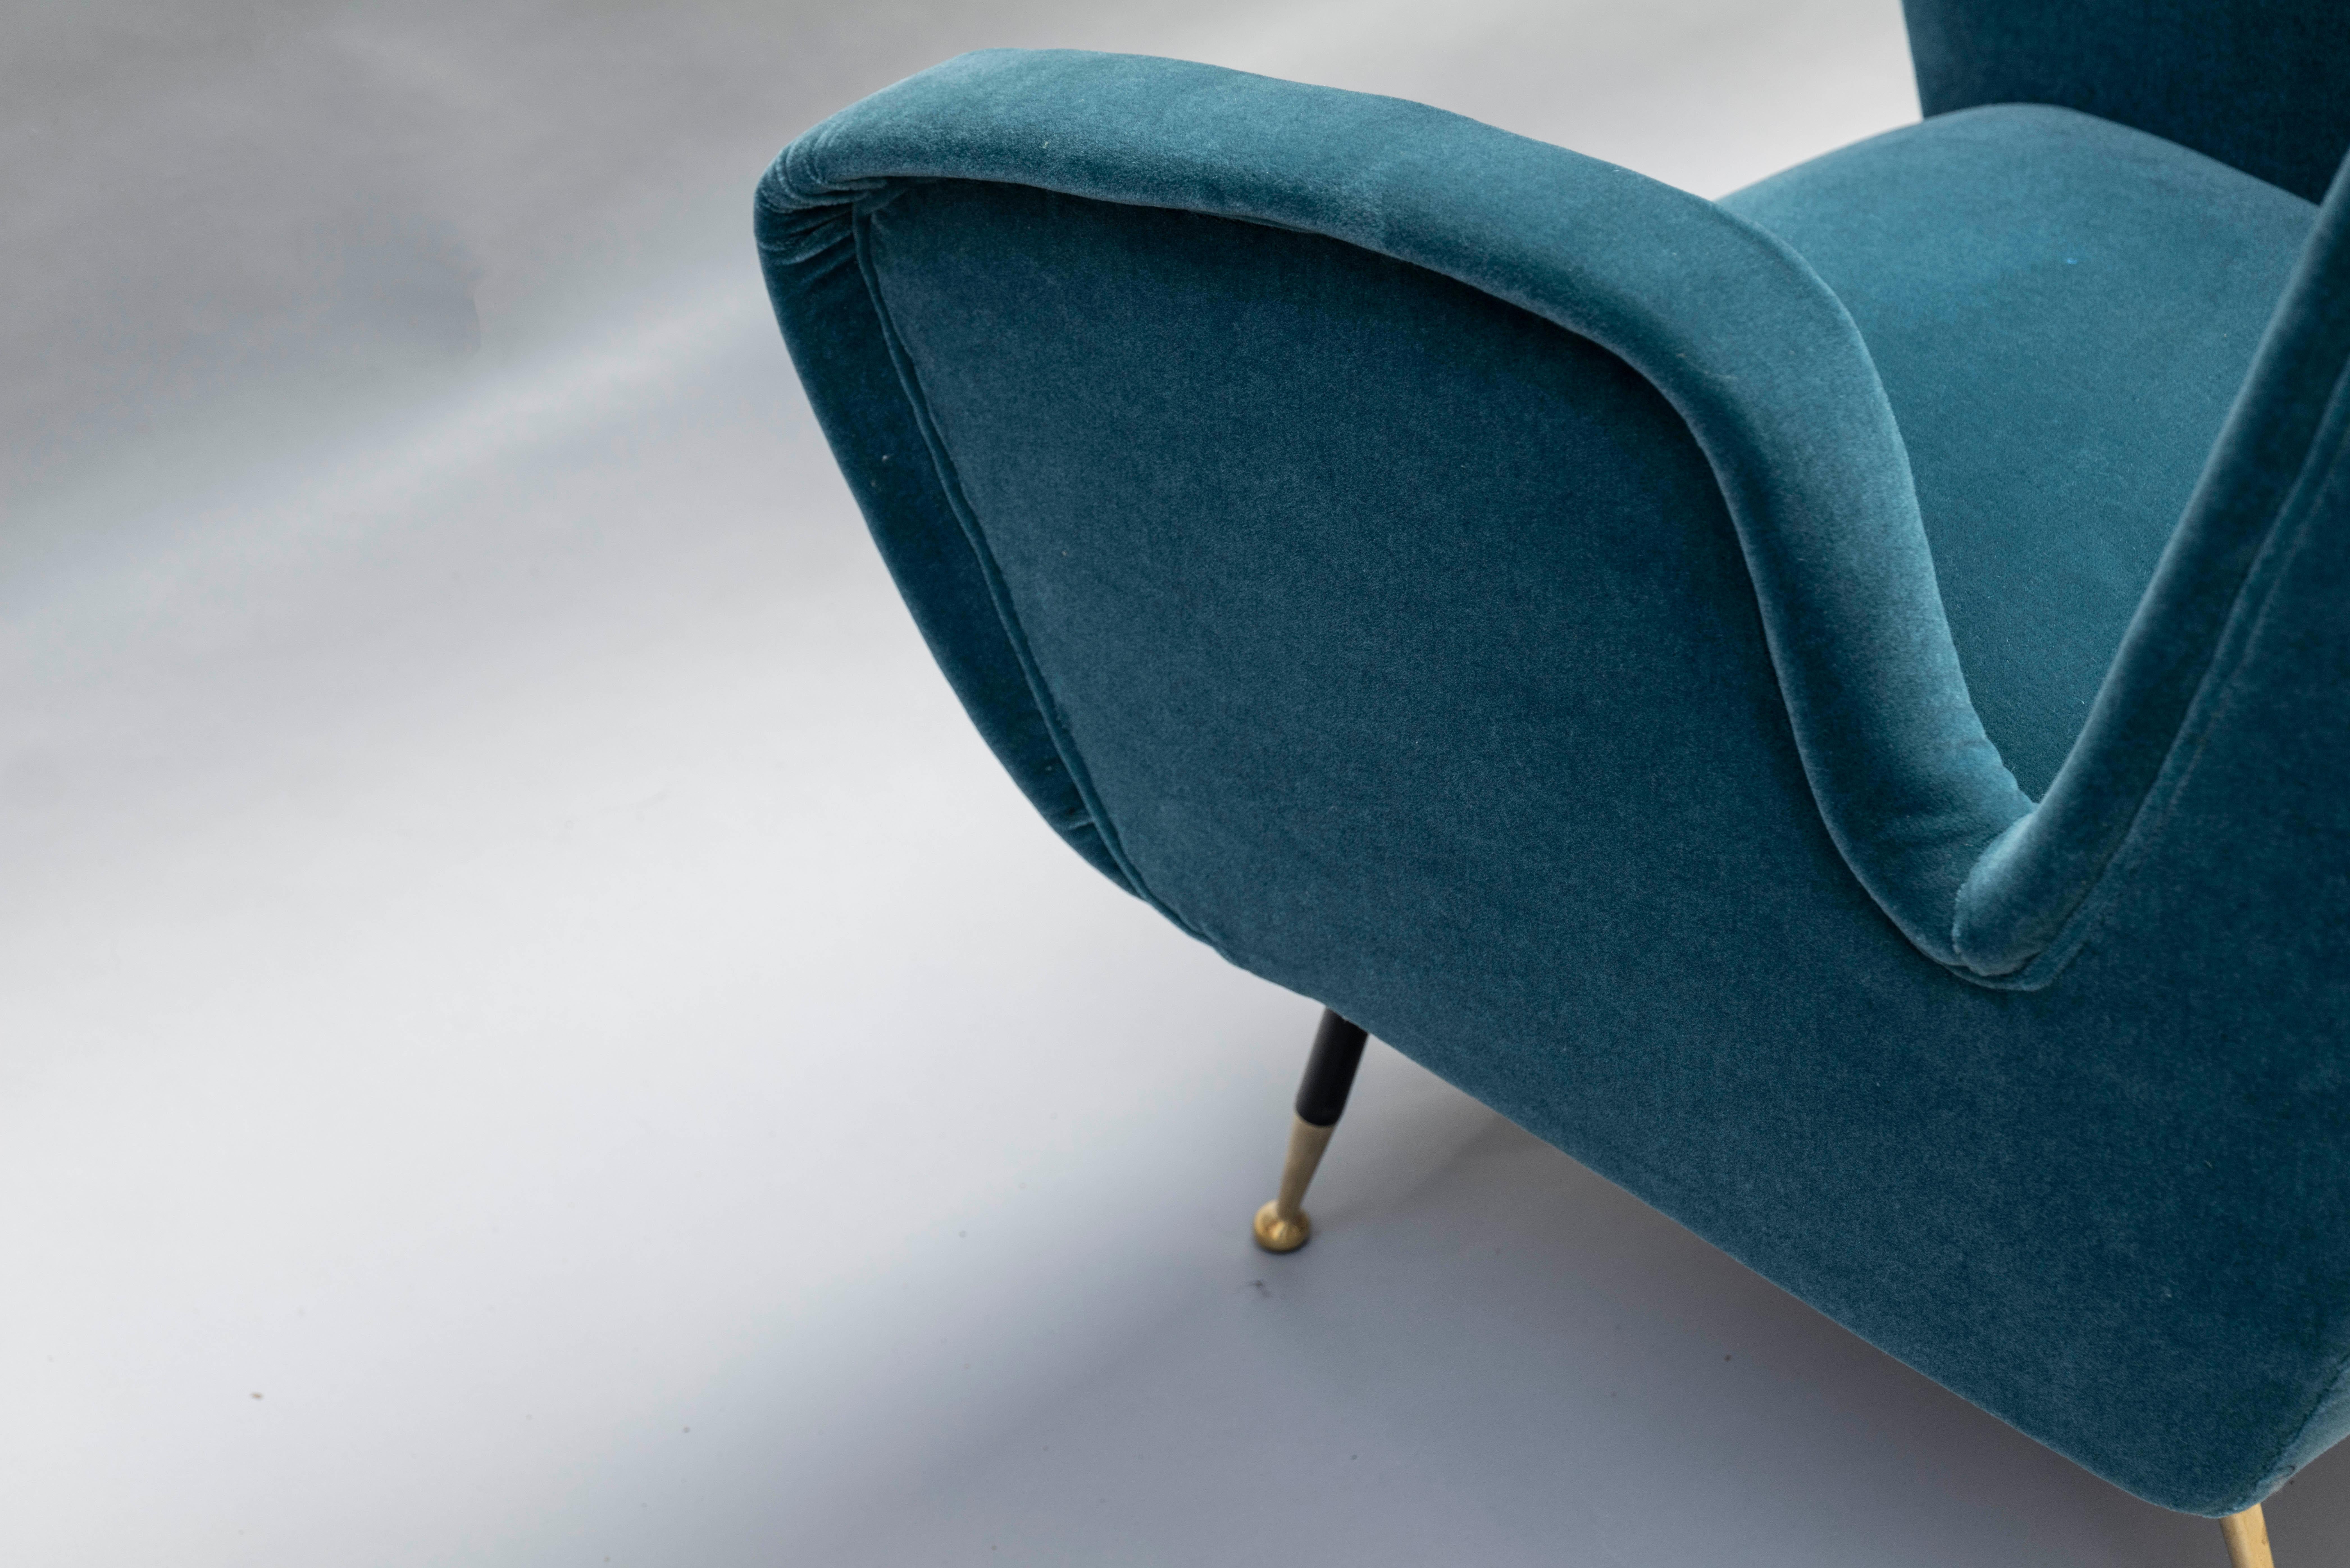 Brass Armchair Attributed To Gio' Ponti, Italy 1950s, In Pierre Frey Mohair